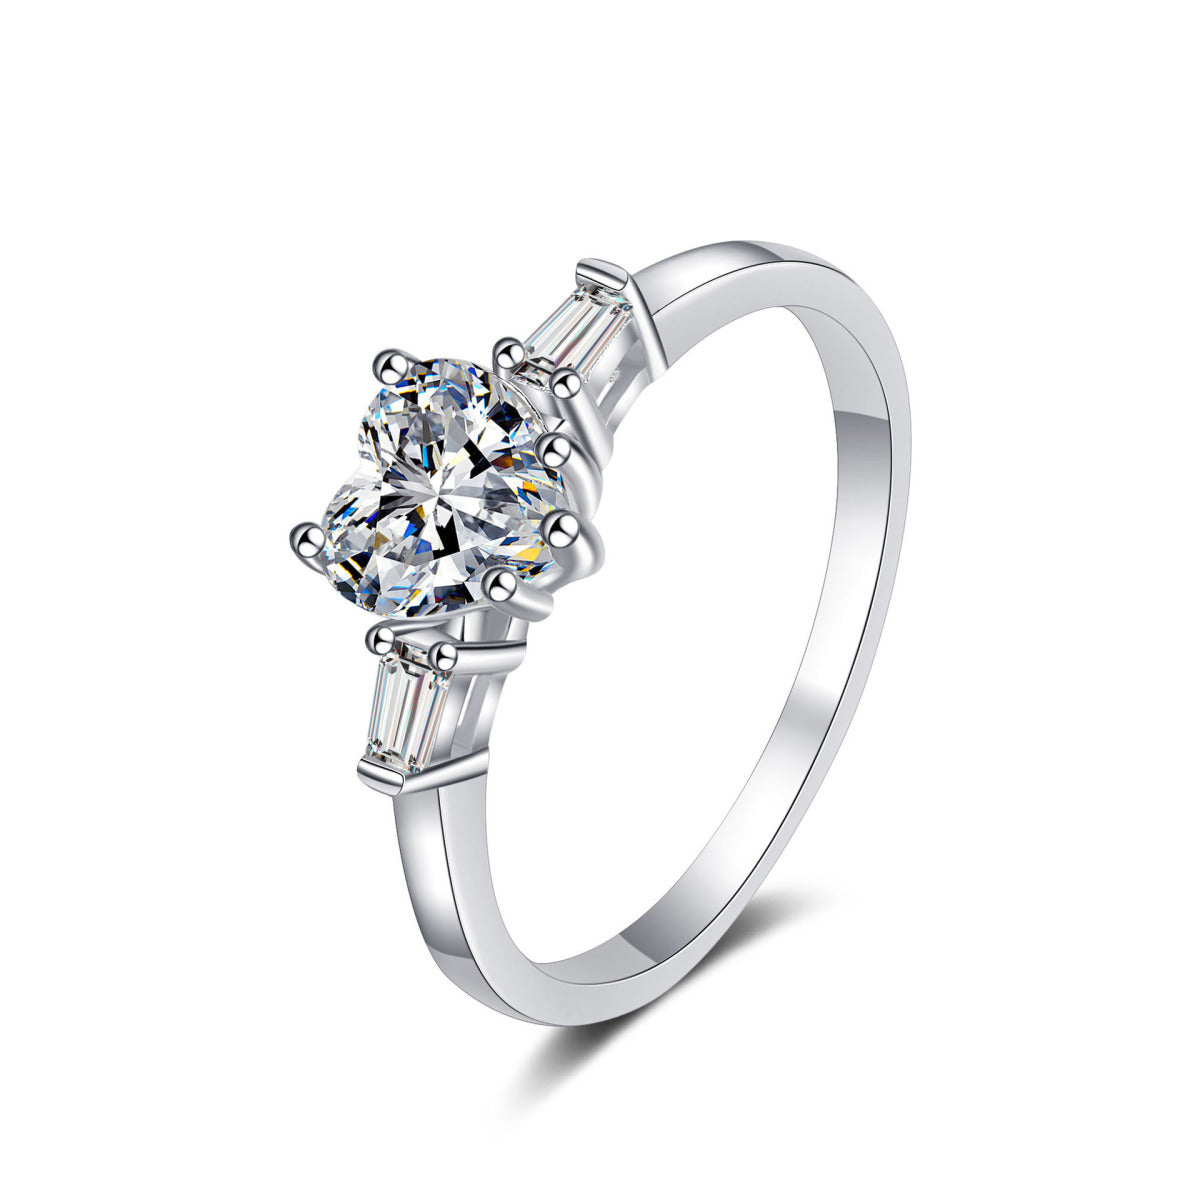 S925 Silver 1.2Ct Heart-Shaped Ring